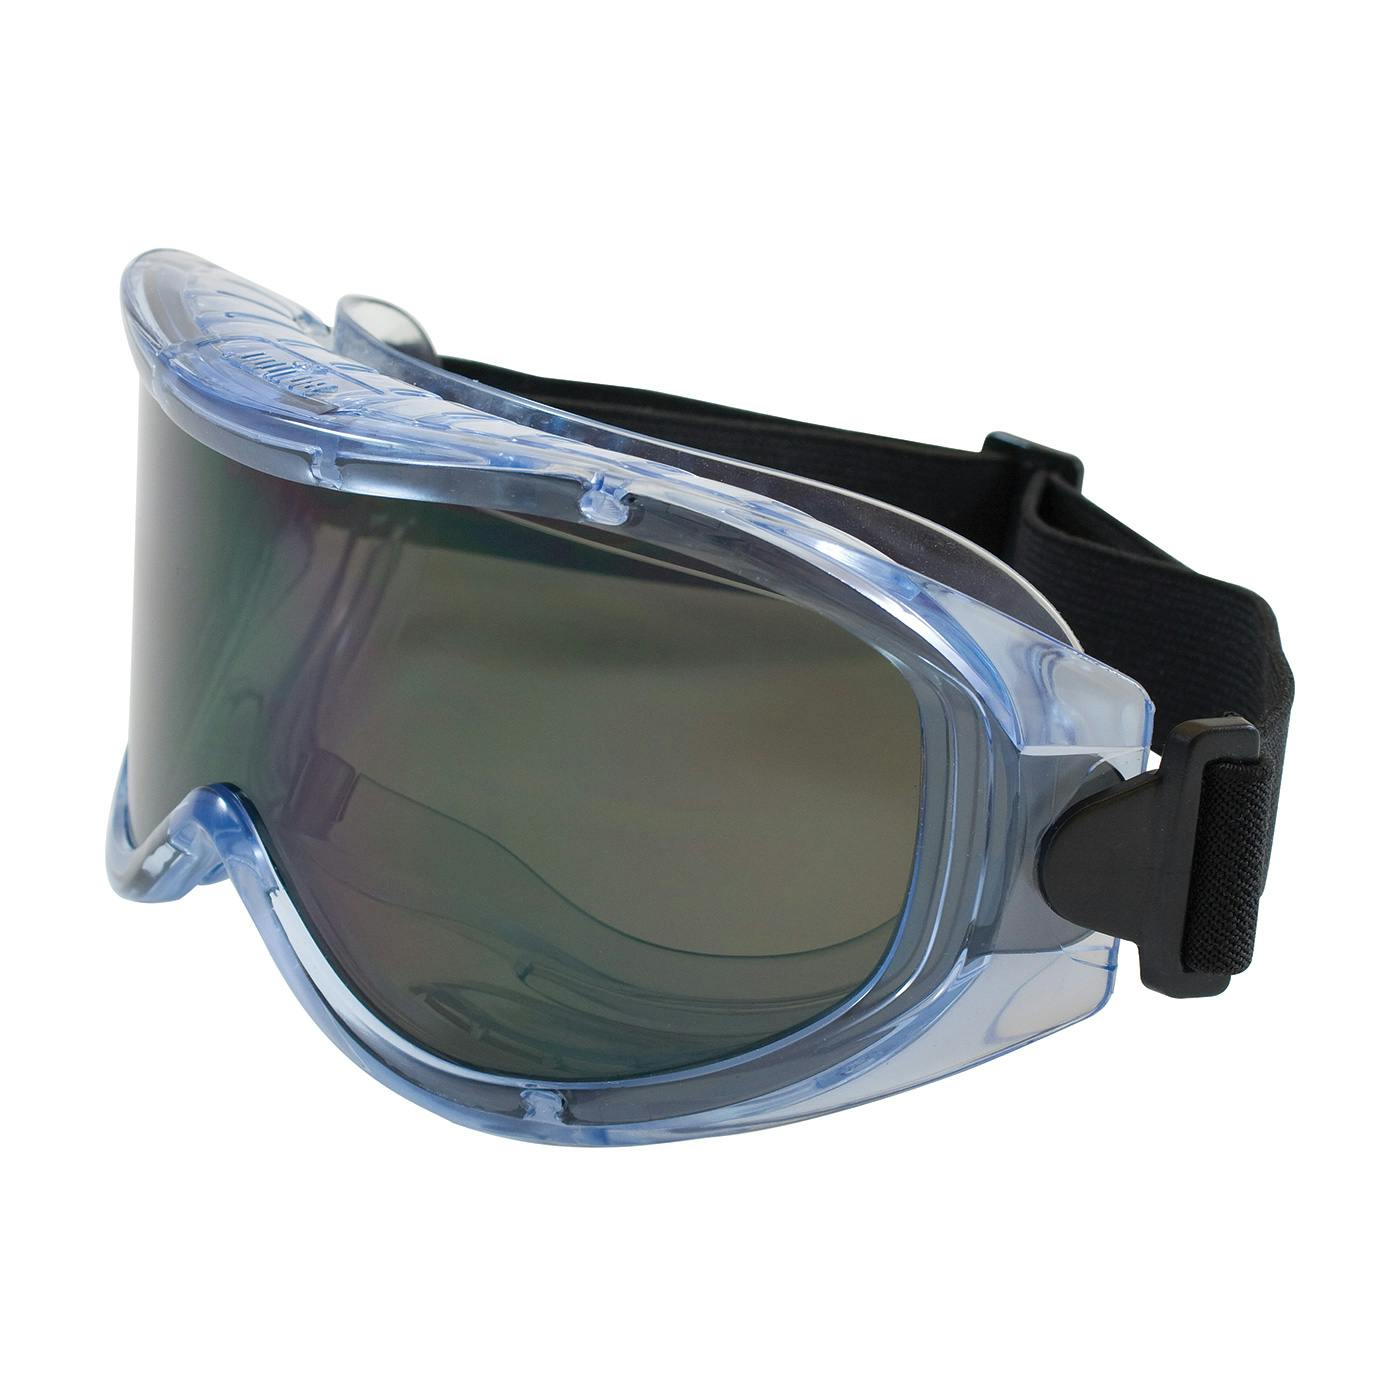 Indirect Vent Goggle with Light Blue Body, Grey Lens and Anti-Scratch / Anti-Fog Coating, Light Blue (251-5300-402) - OS